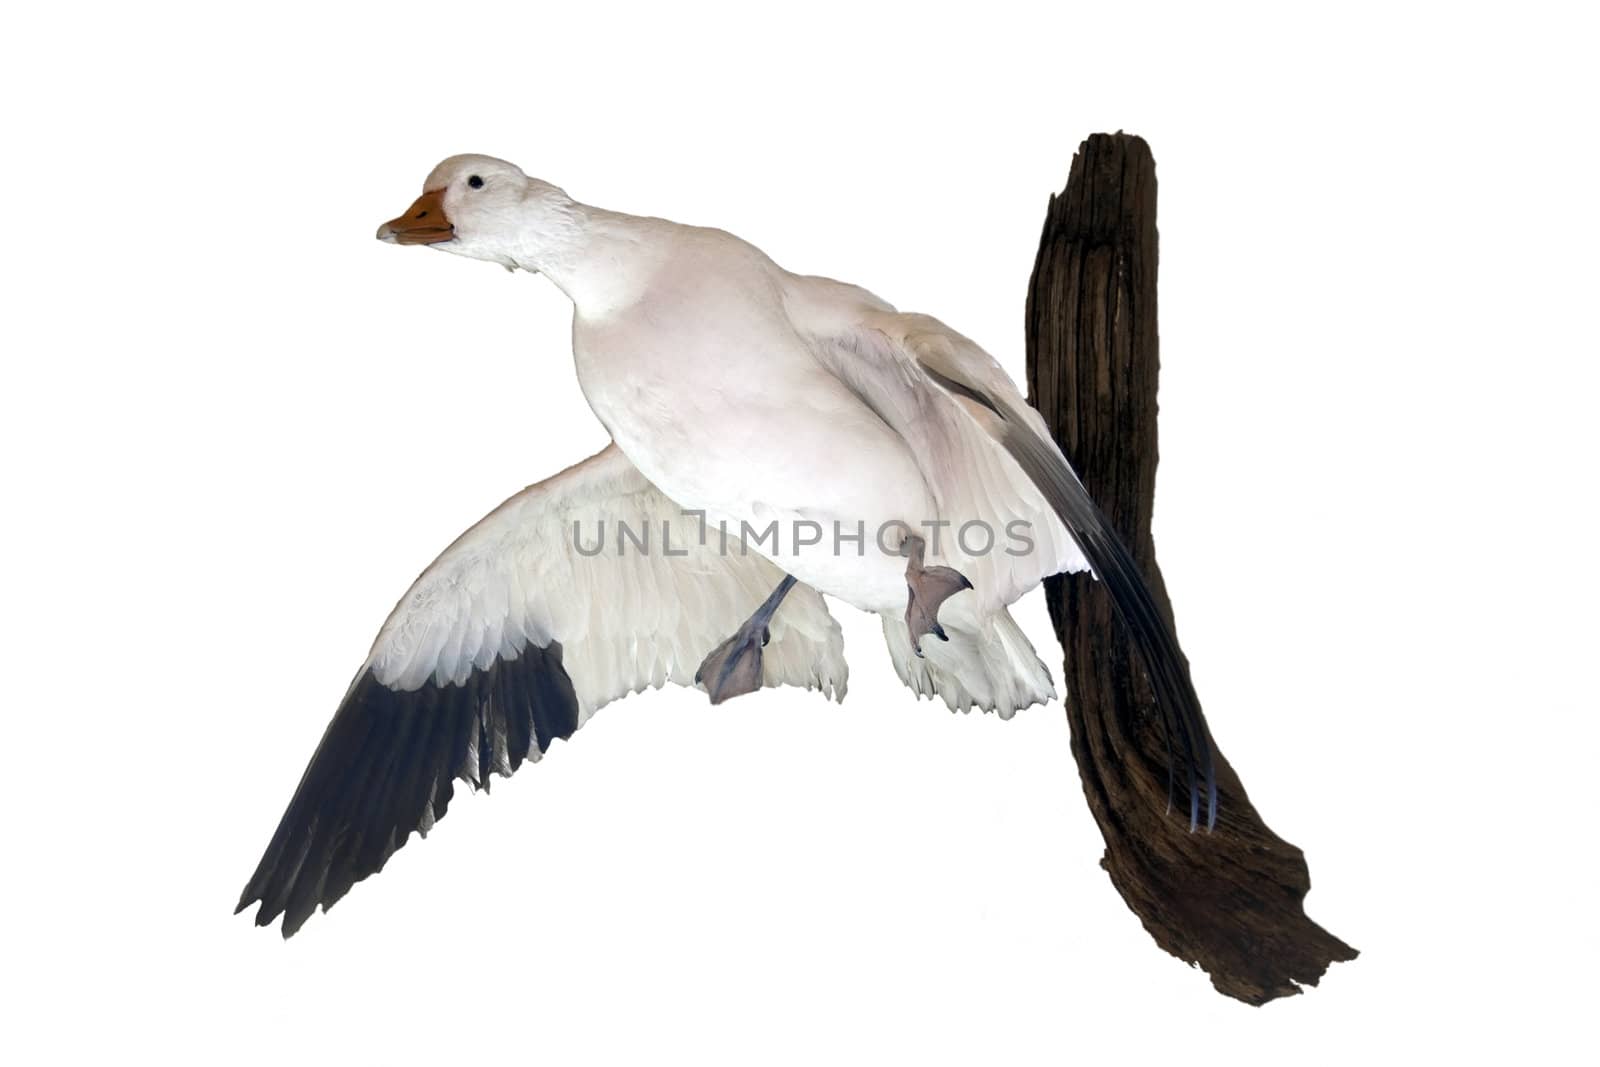 A duck that has been mounted via taxidermy on white background